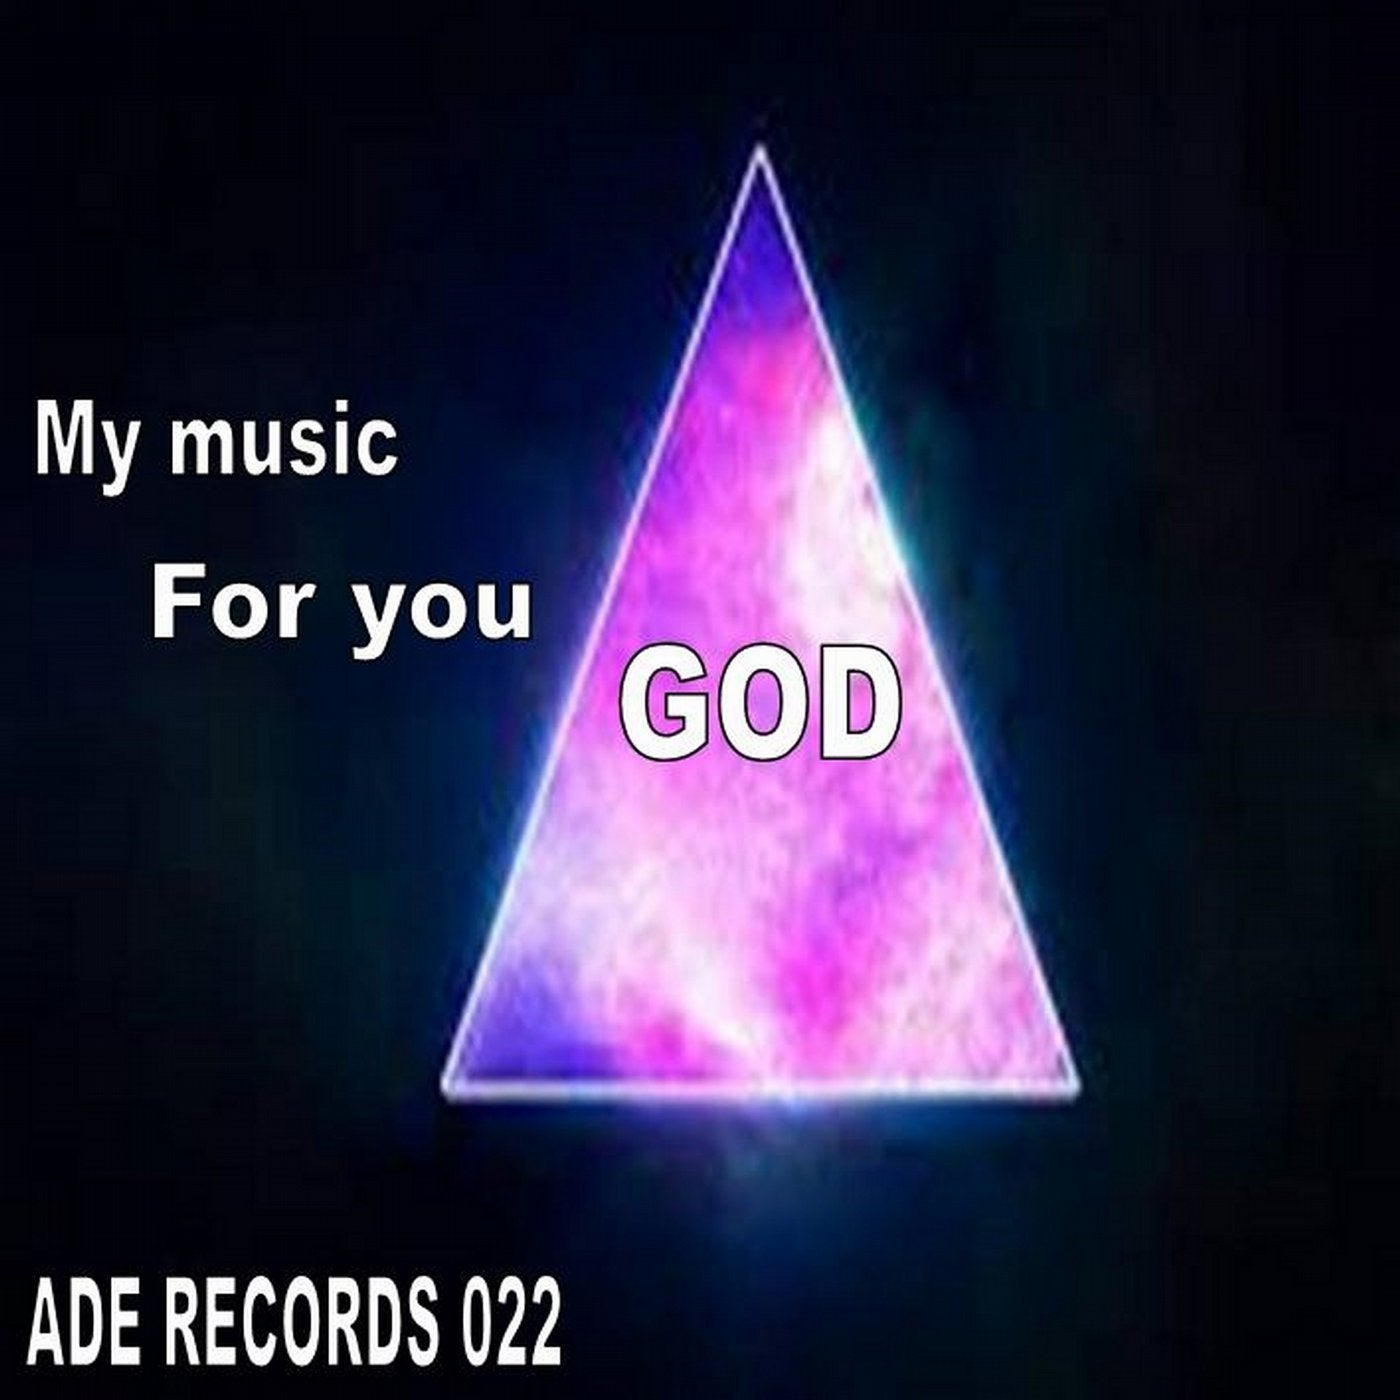 My Music for You God